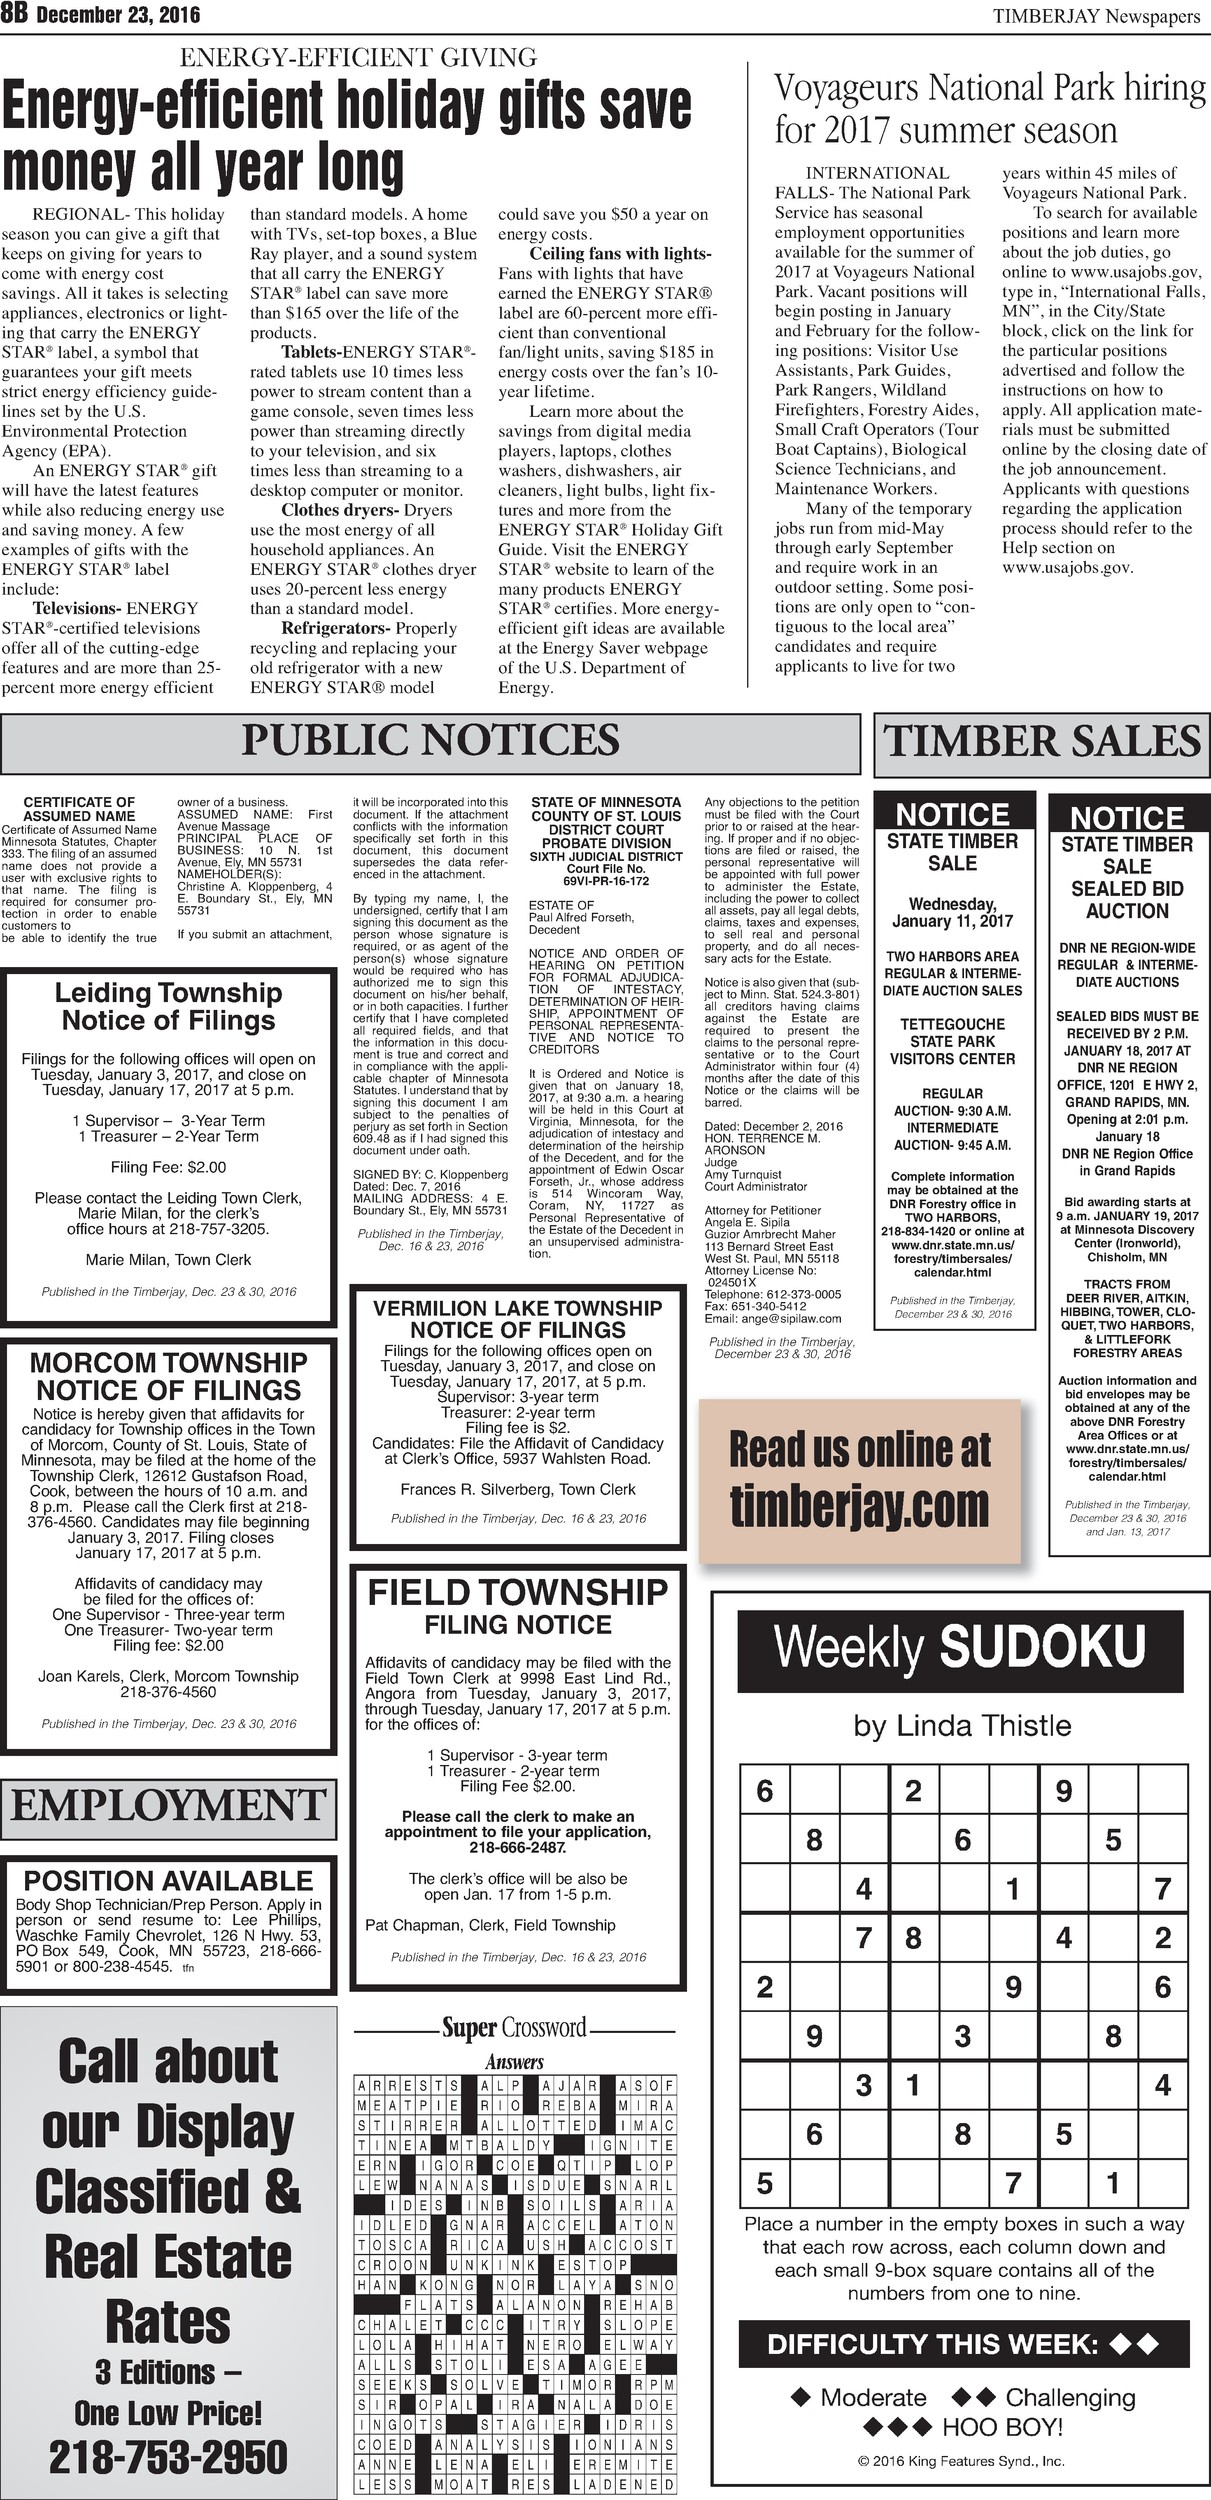 Click here to view the legal notices and classifieds on page8B